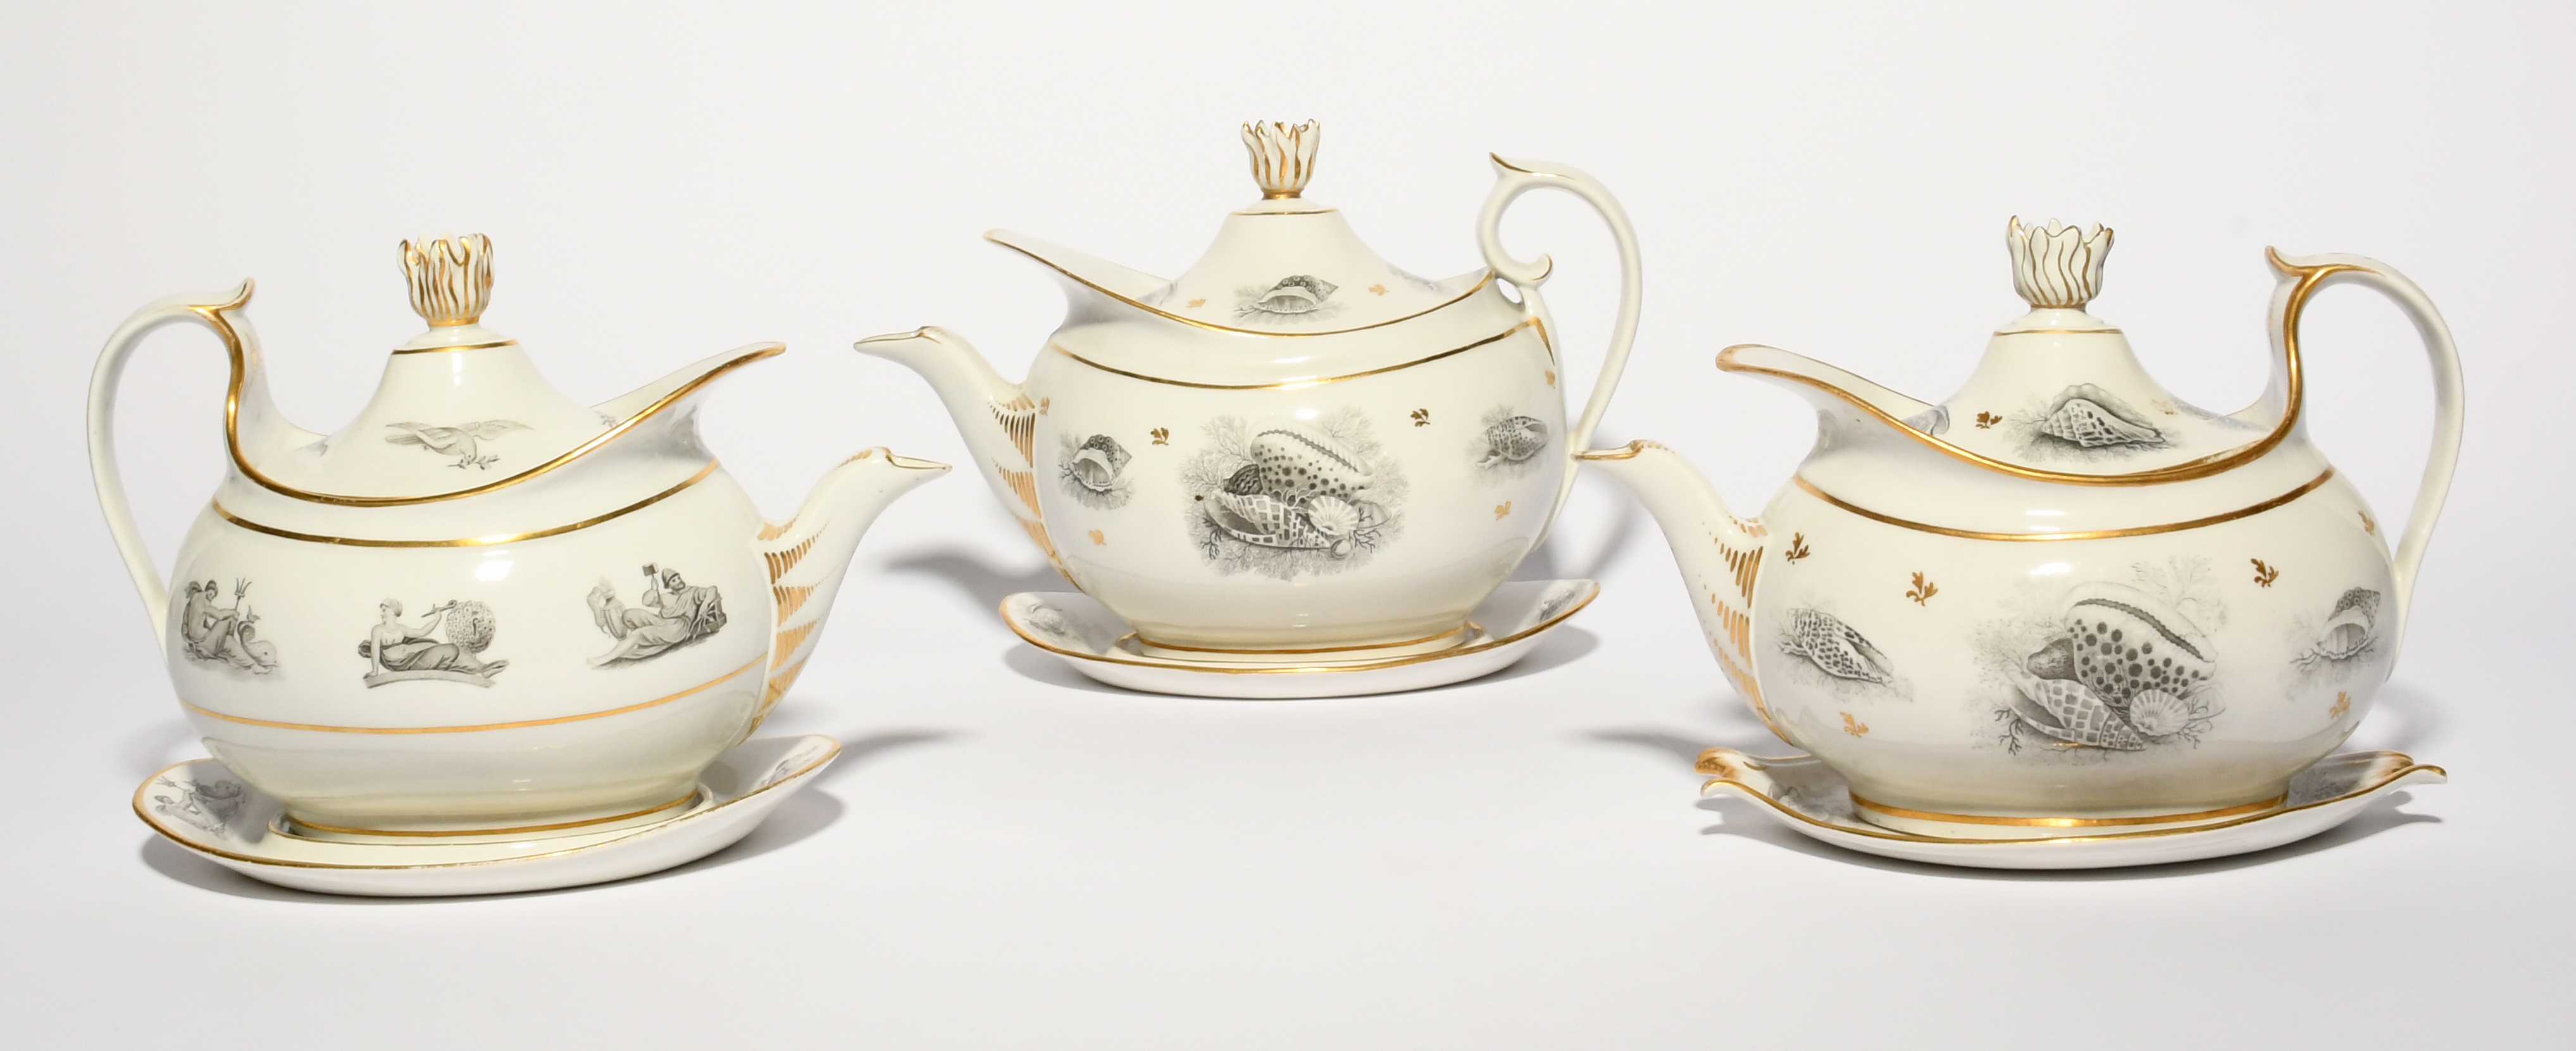 Three Barr Flight and Barr (Worcester) teapots with covers and stands, c.1810, bat printed in black, - Image 2 of 4